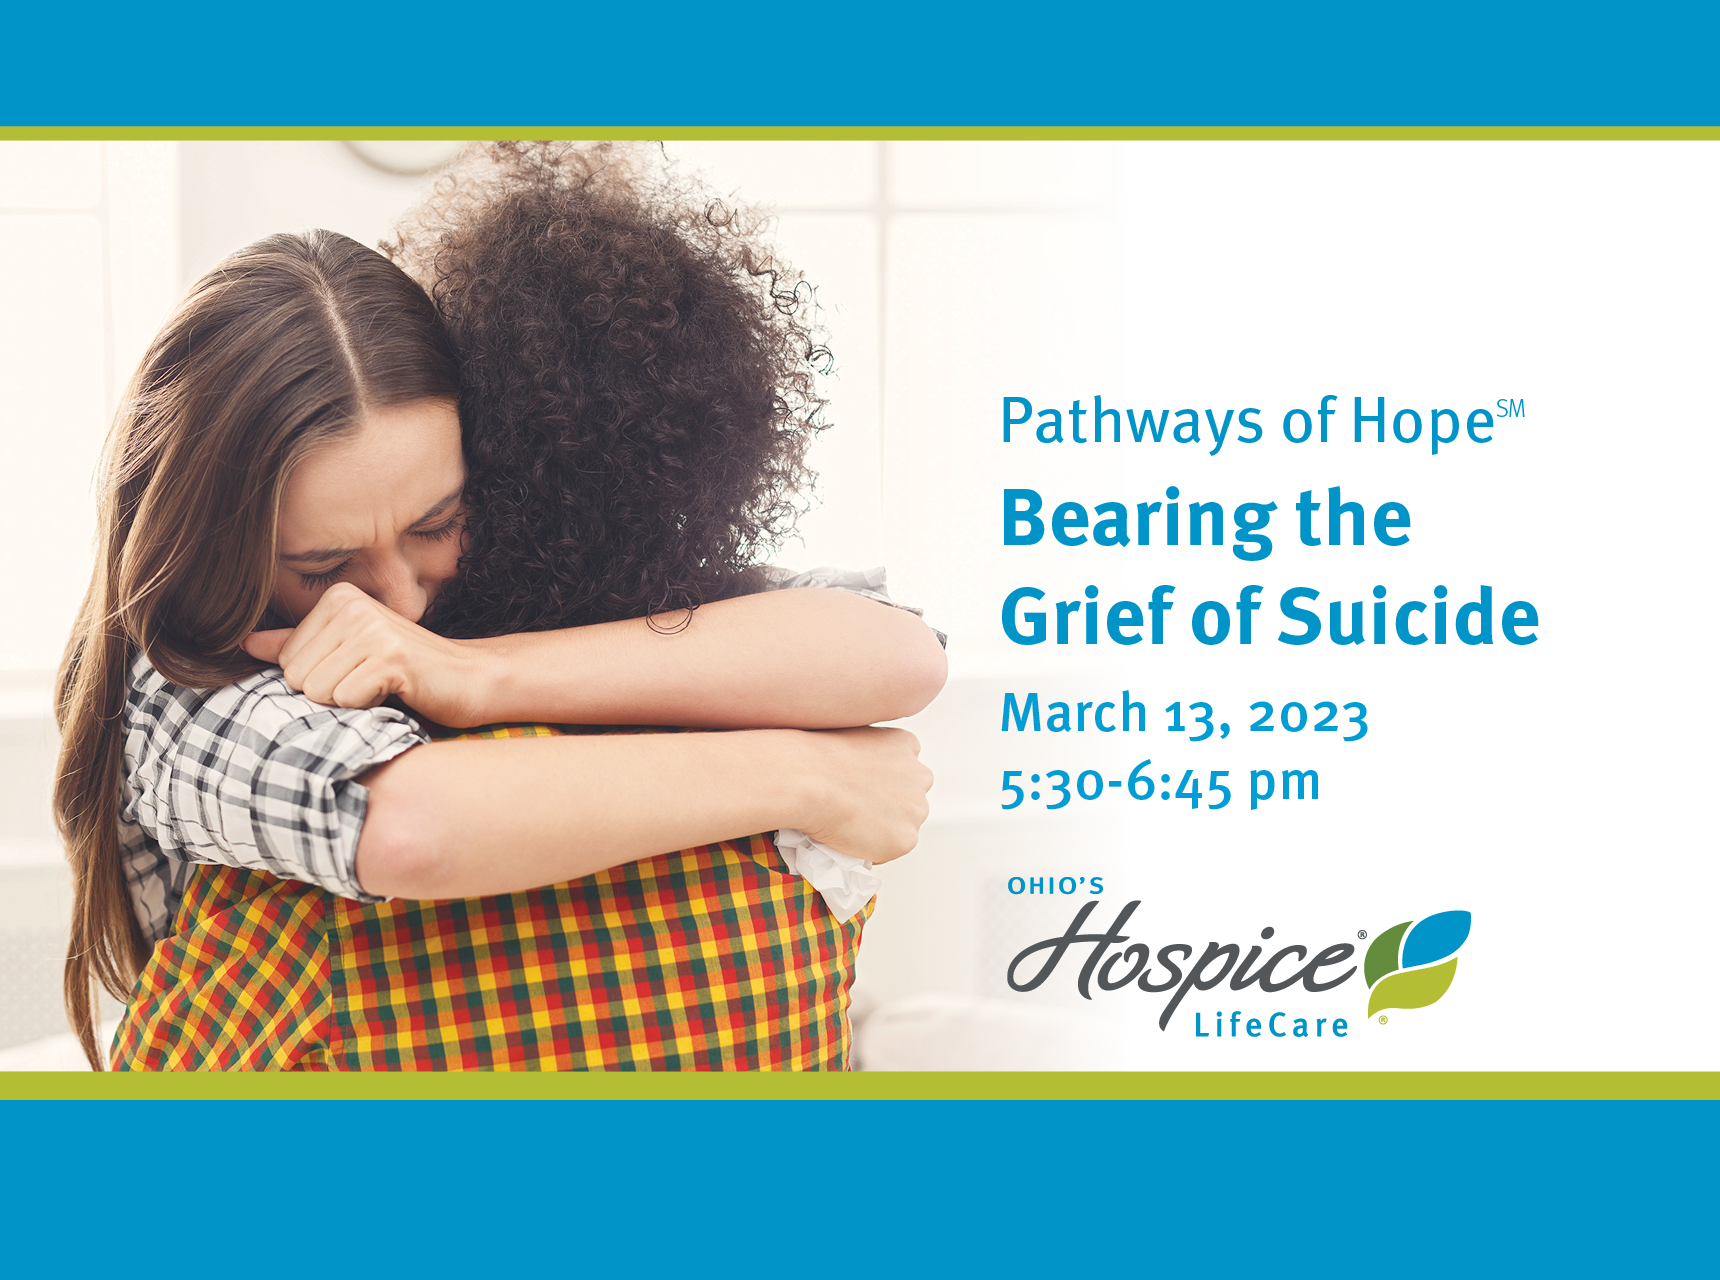 Ohio's Hospice LifeCare Pathways of Hope Bereavement Workshop Bearing the Grief of Suicide March 13, 2023 5:30-6:45 pm